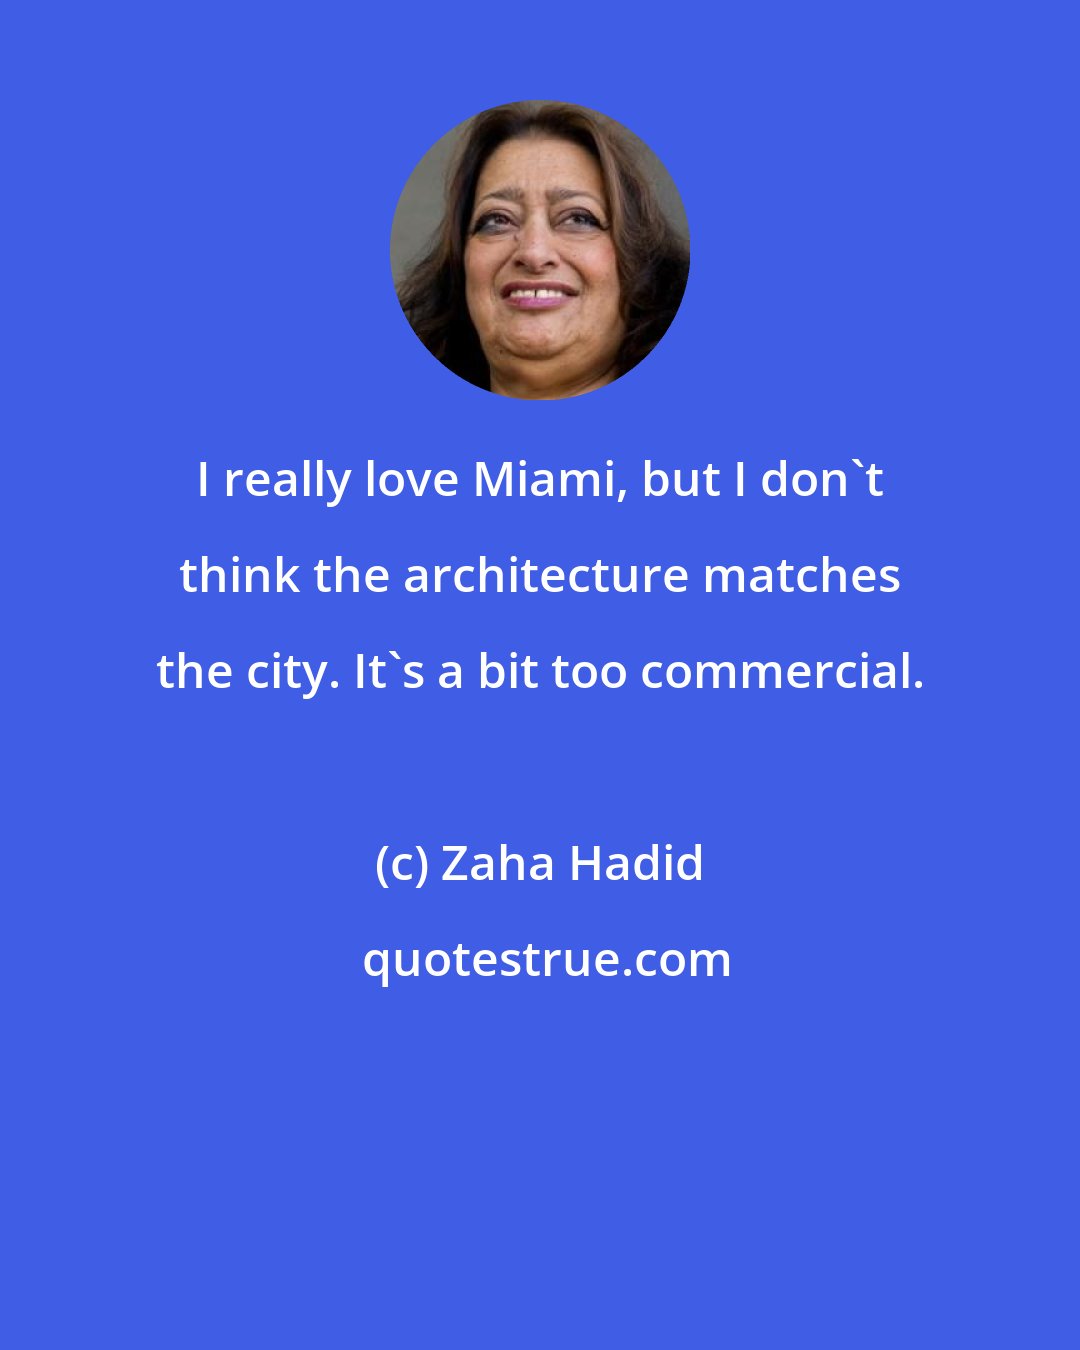 Zaha Hadid: I really love Miami, but I don't think the architecture matches the city. It's a bit too commercial.